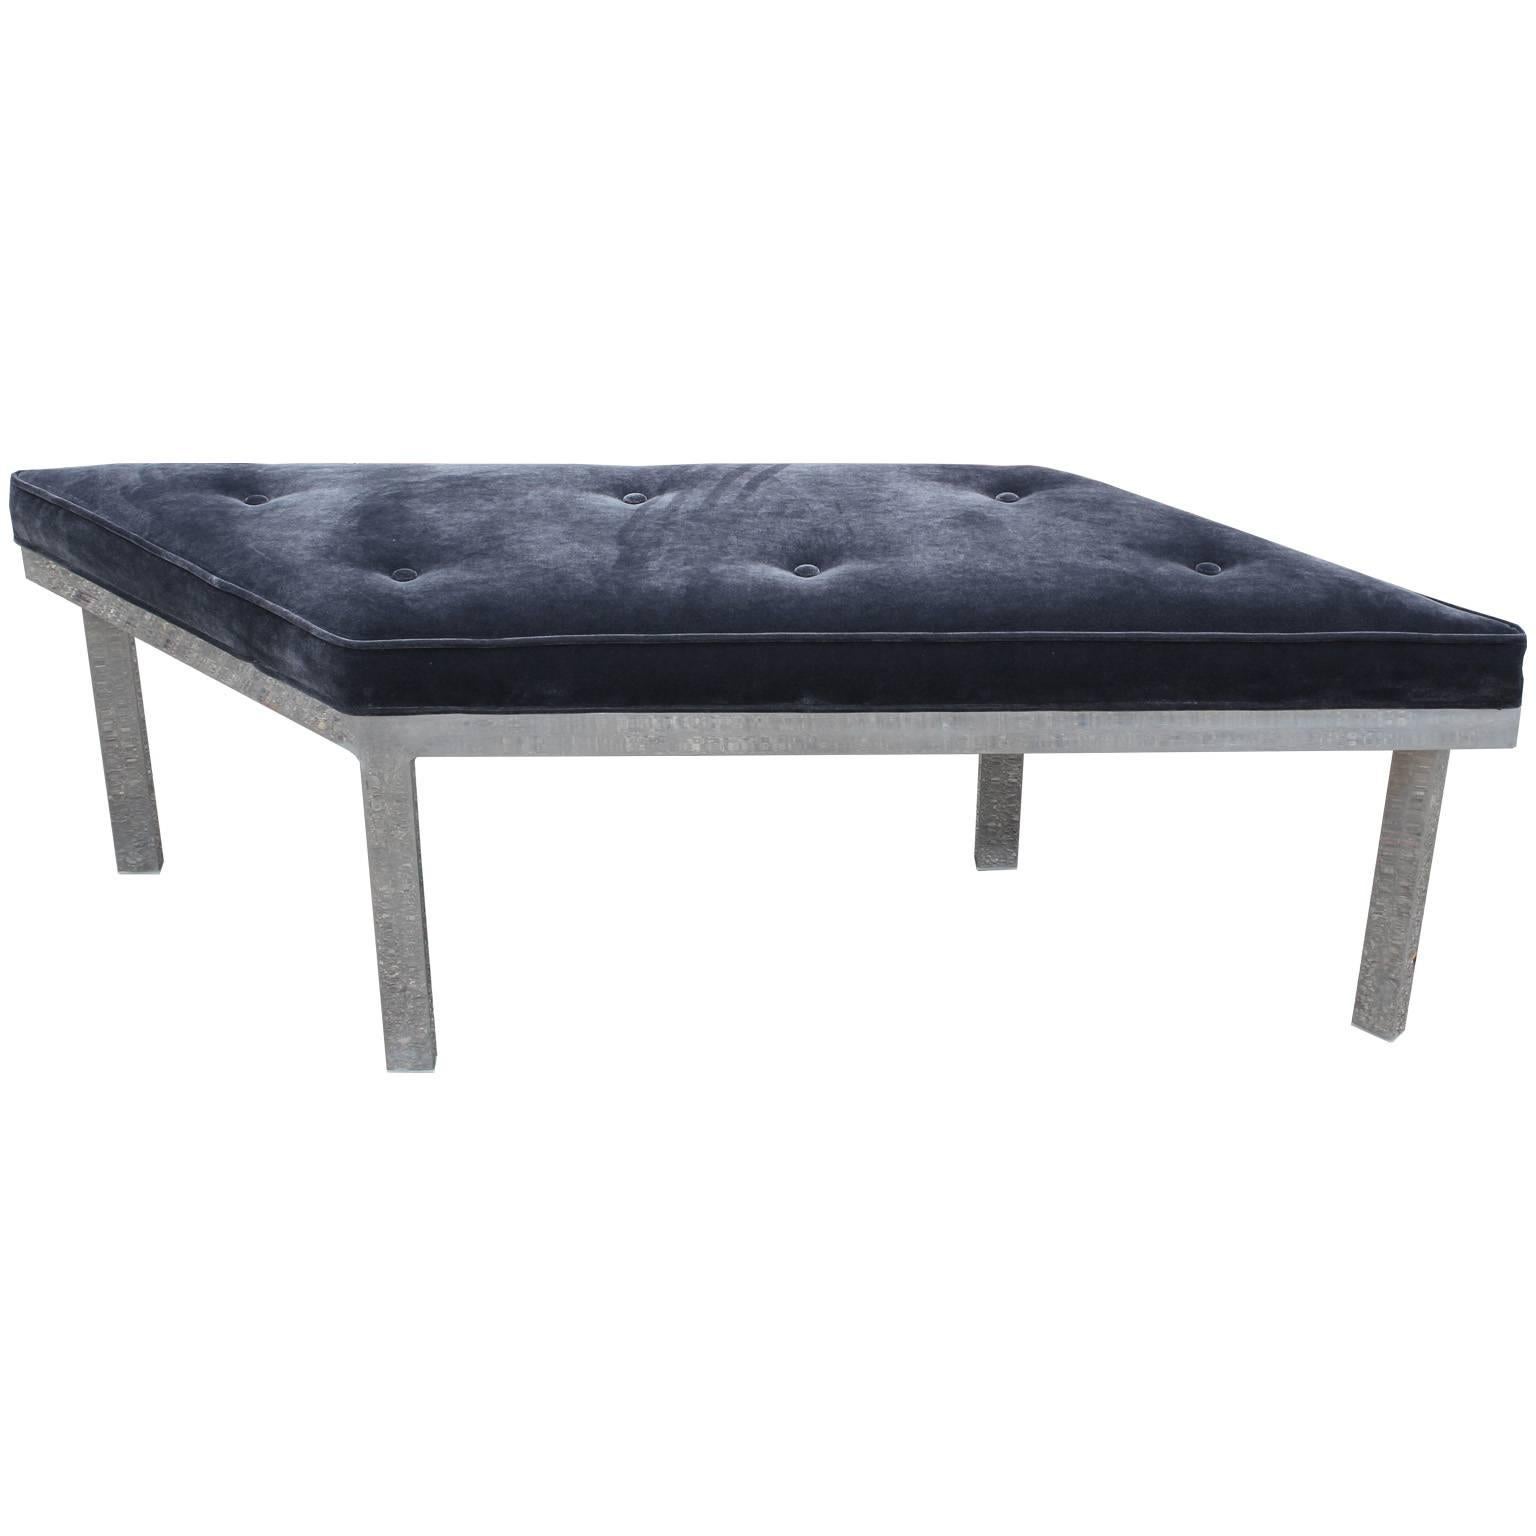 Fabulous parallelogram shaped bench or ottoman. Freshly upholstered in a lightly tufted grey velvet. Aluminium base. Would be perfect used as a coffee table as well.